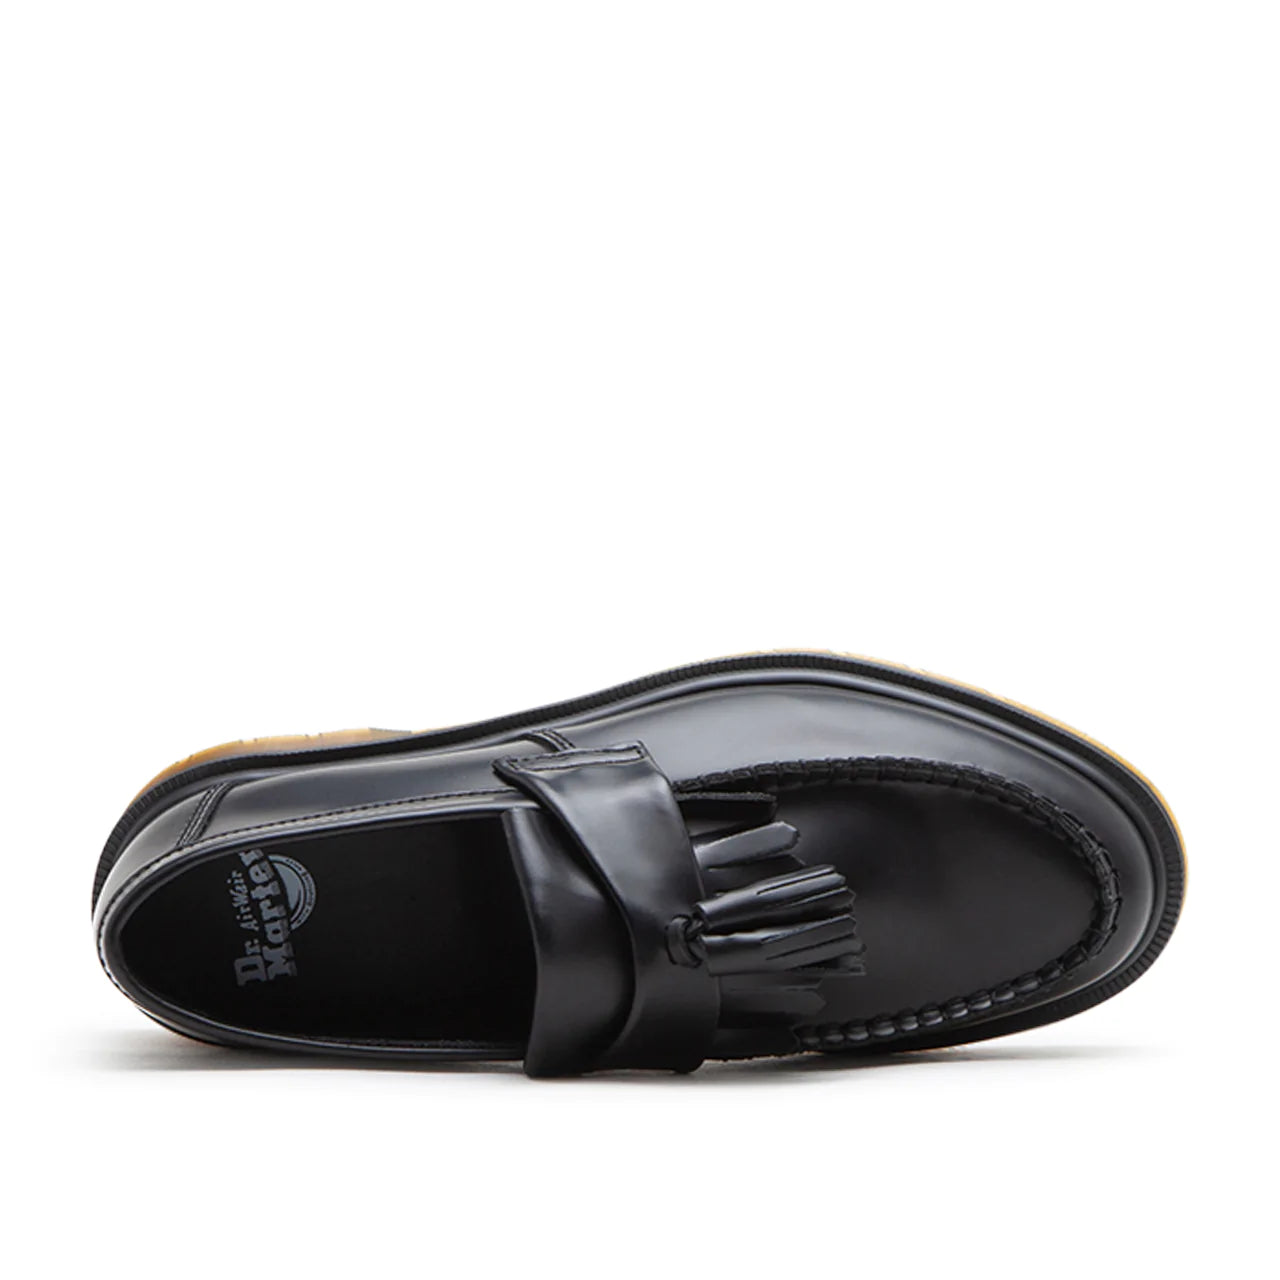 Dr. Martens Adrian Smooth Loafers (Schwarz)  - Allike Store